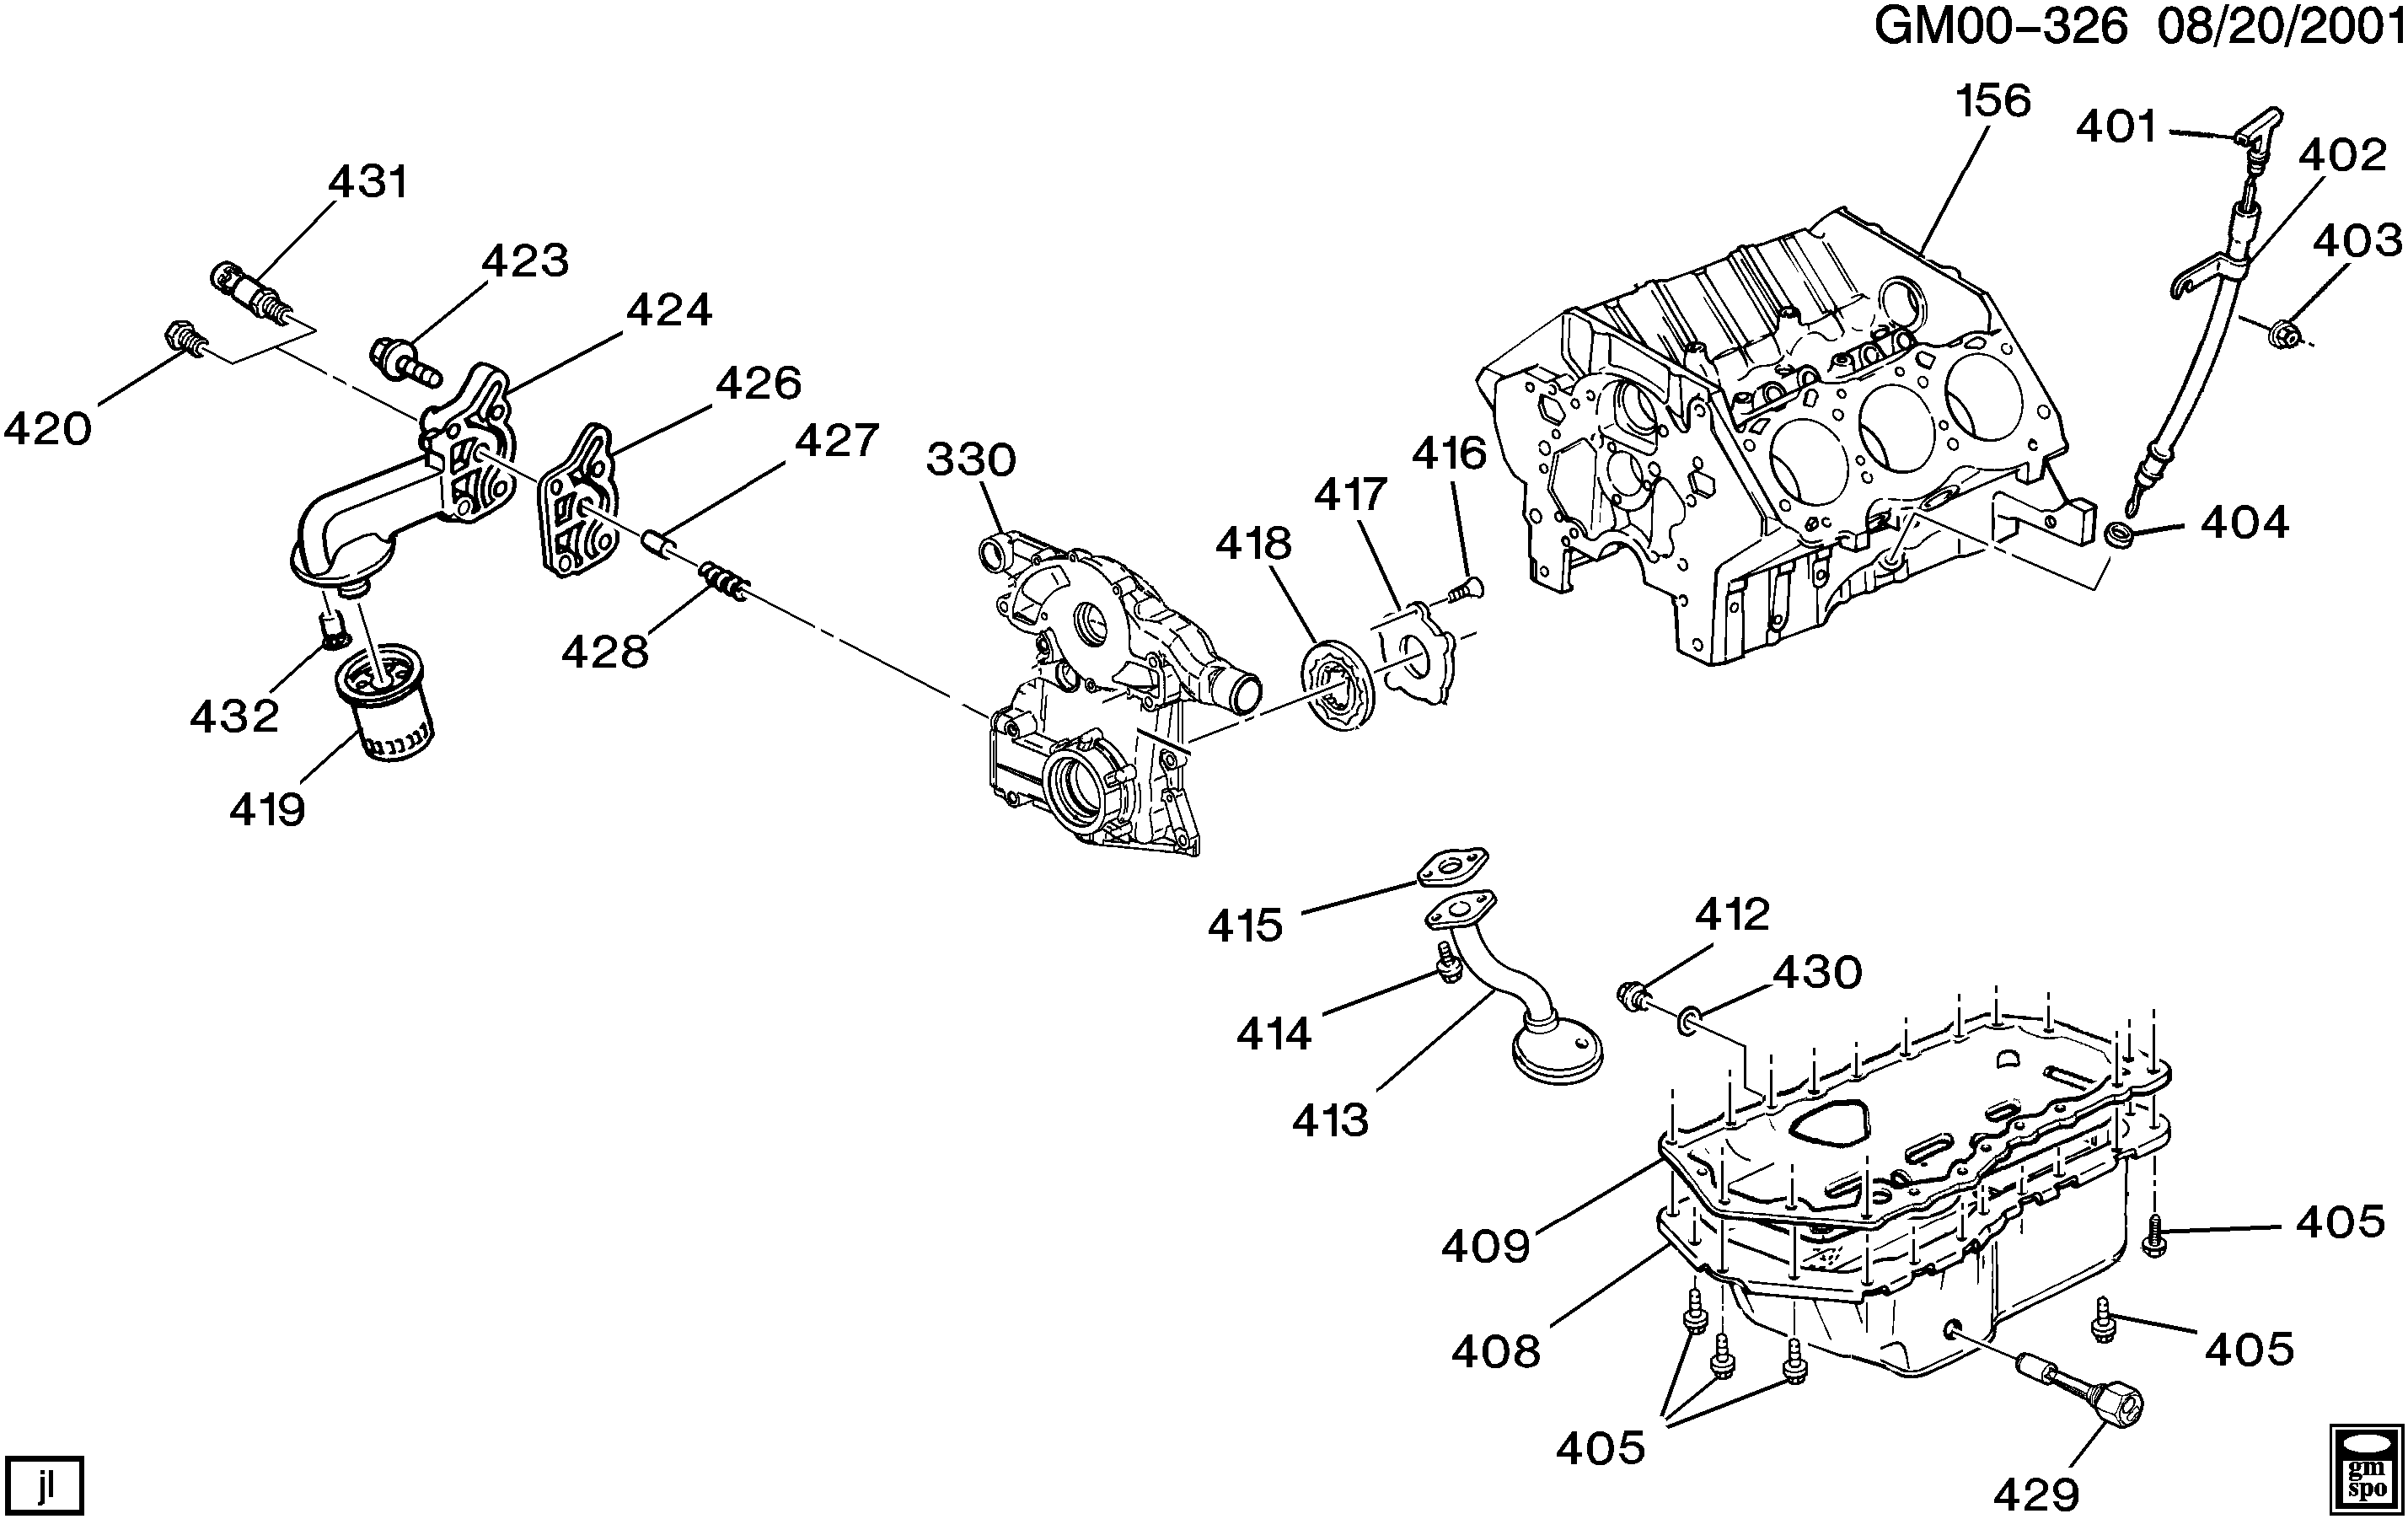 1997-1998 W ENGINE ASM-3.8L V6 PART 4 OIL PUMP,PAN AND RELATED PARTS (L36/3.8K)